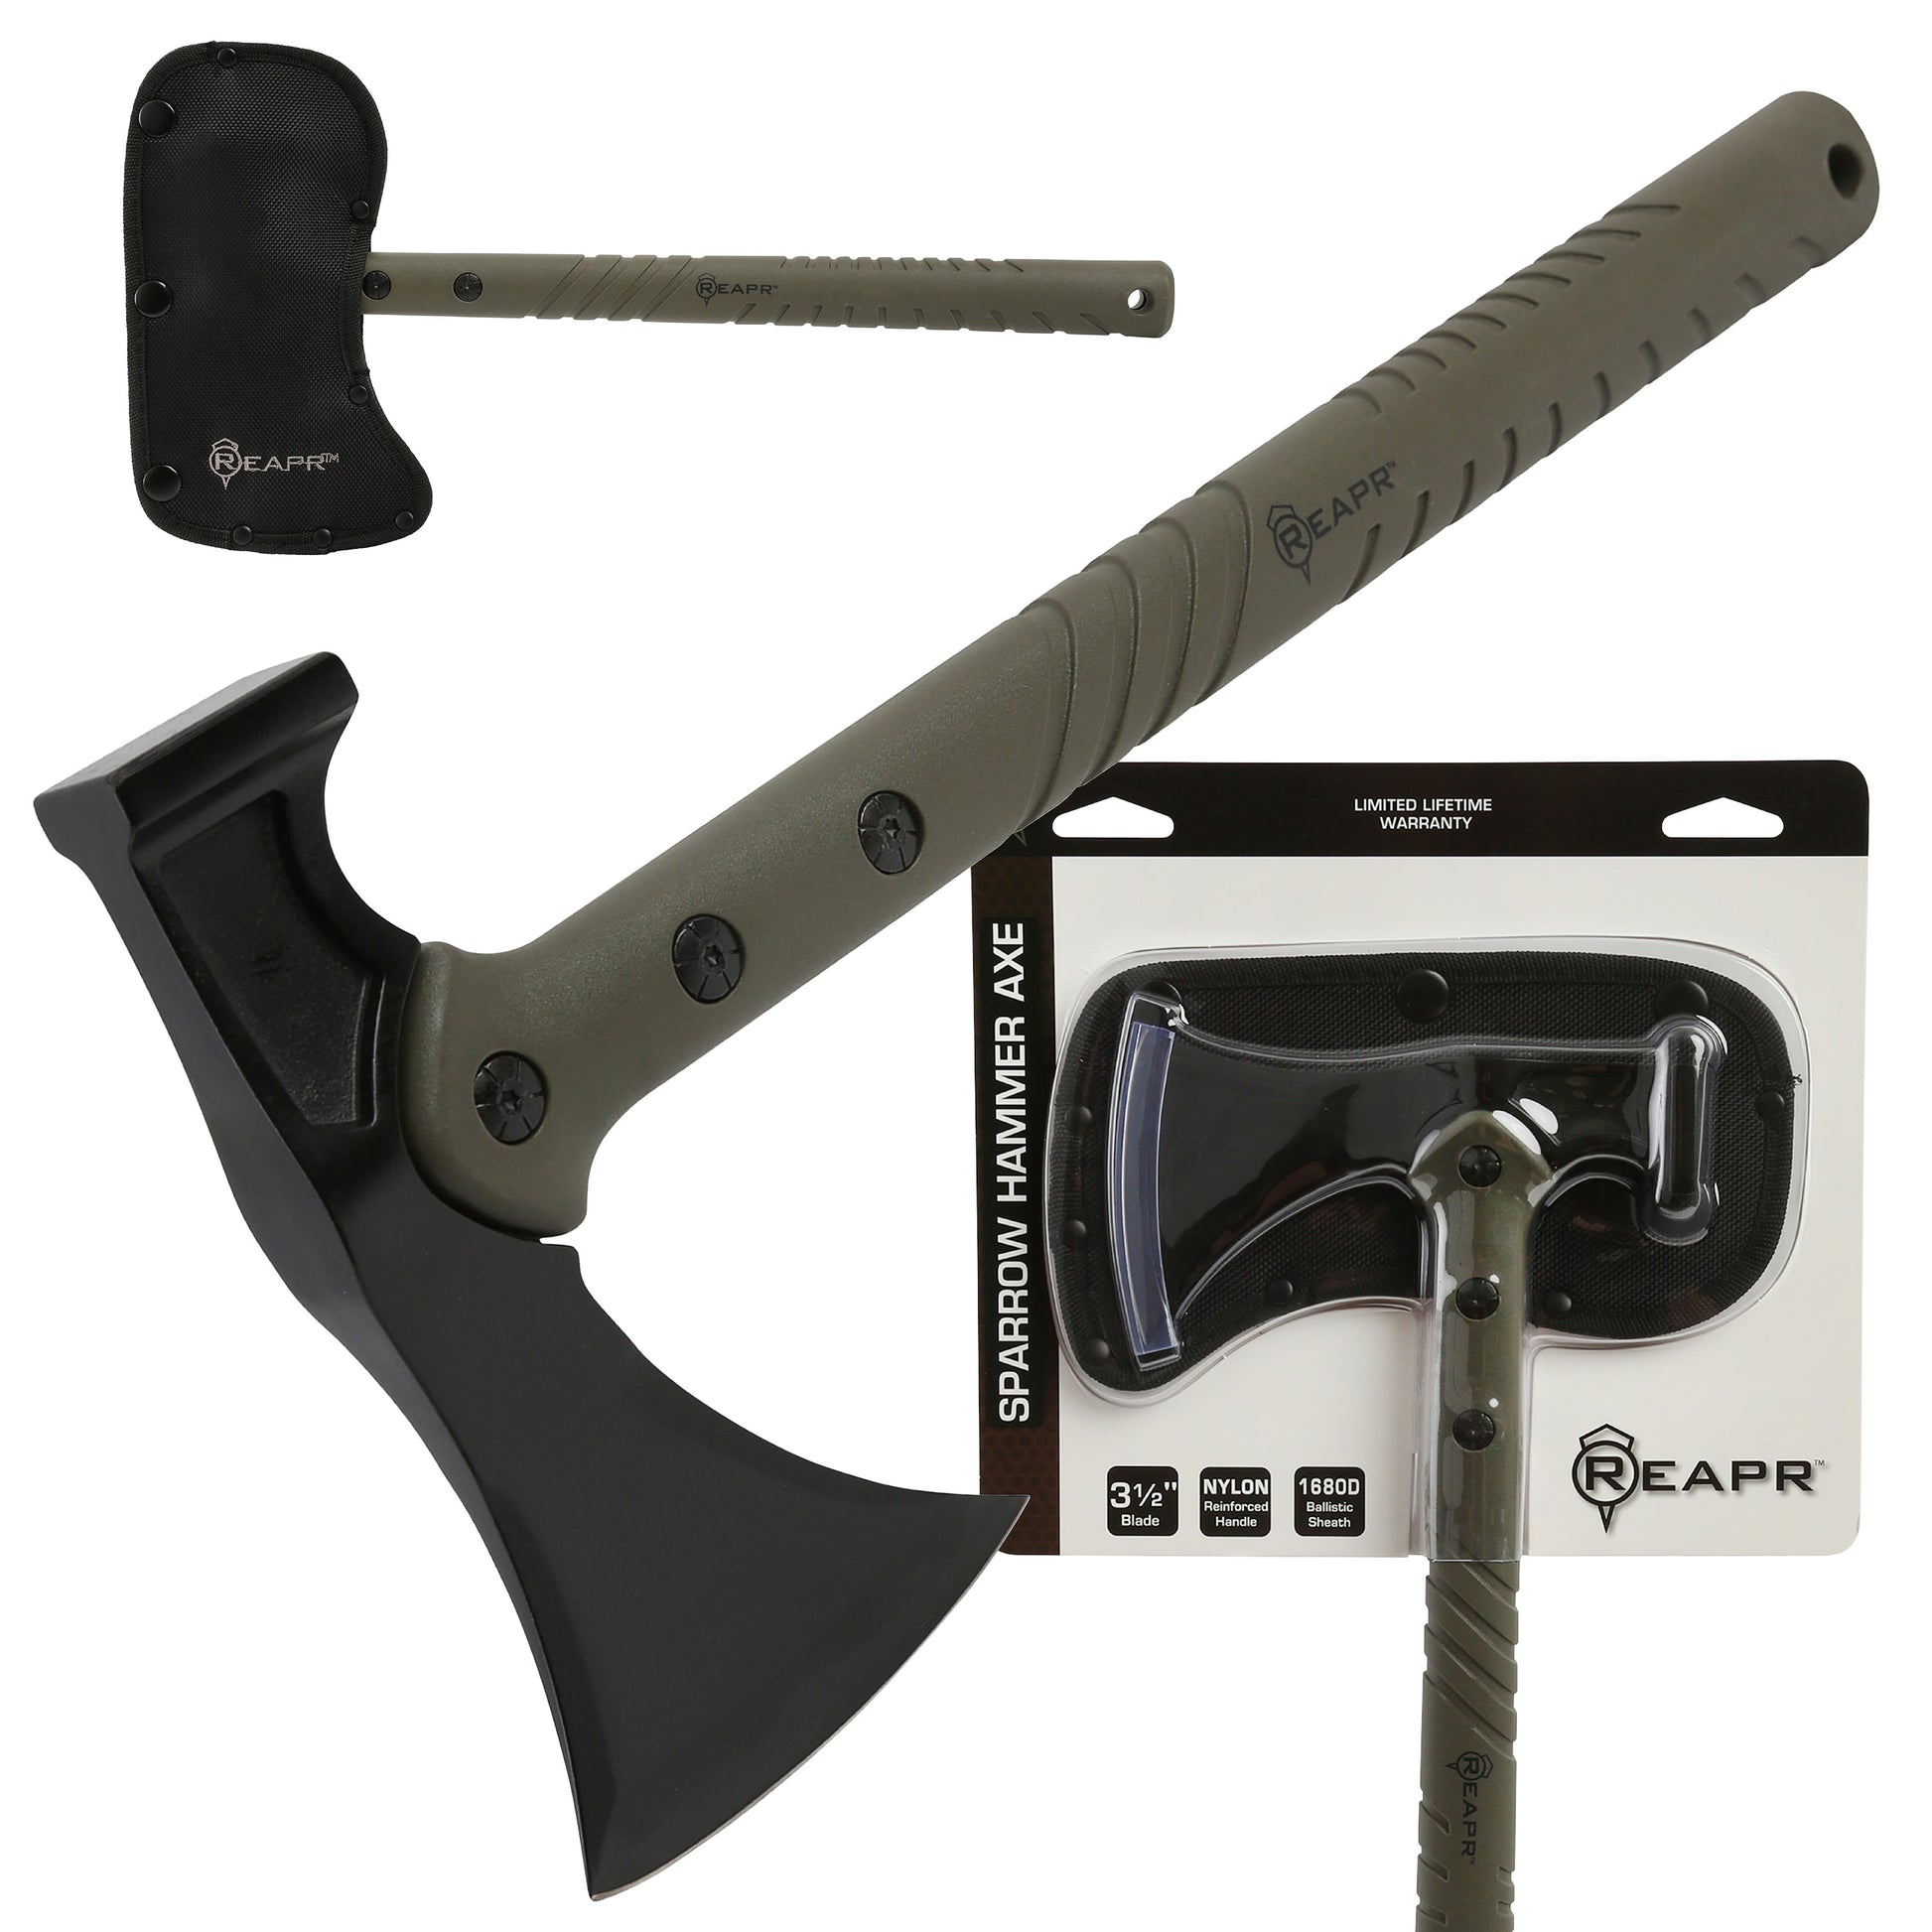 REAPR 11778 Sparrow Hammer Axe, stainless steel precision cast head, two-in-one axe and hammer combination 